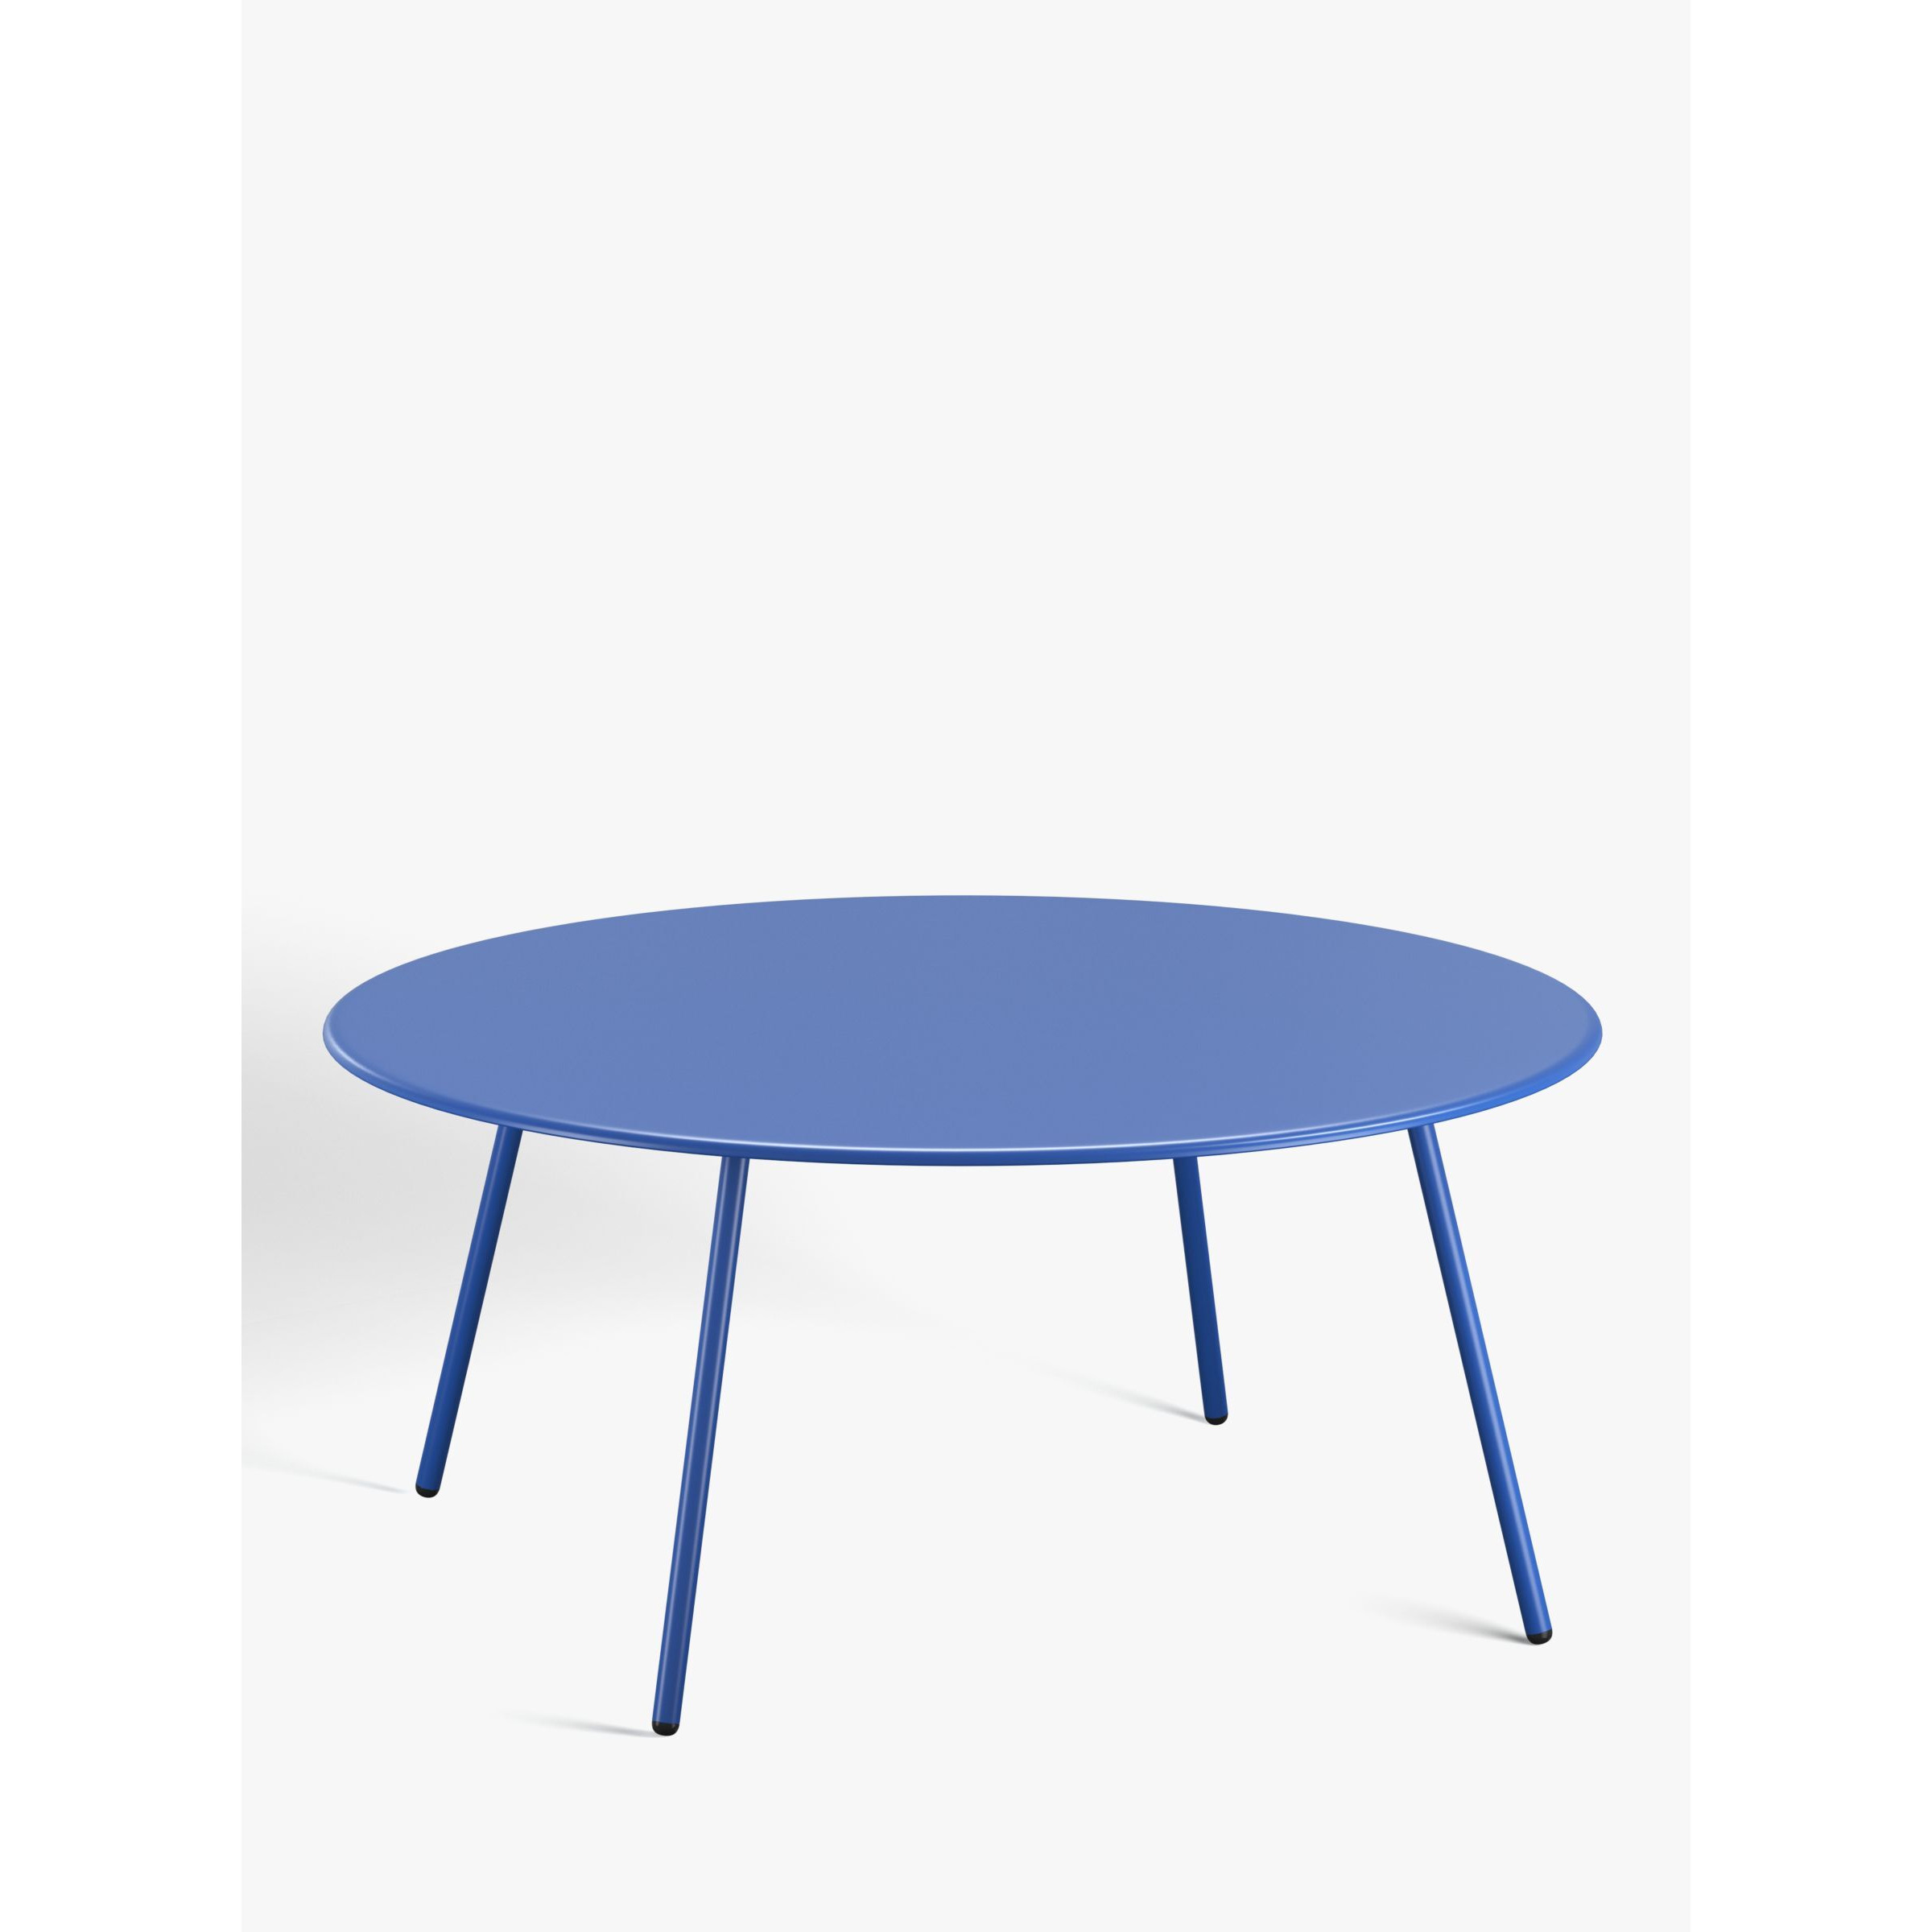 John Lewis ANYDAY Brights 4-Seater Metal Round Garden Dining Table, 100cm, Estate Blue - image 1